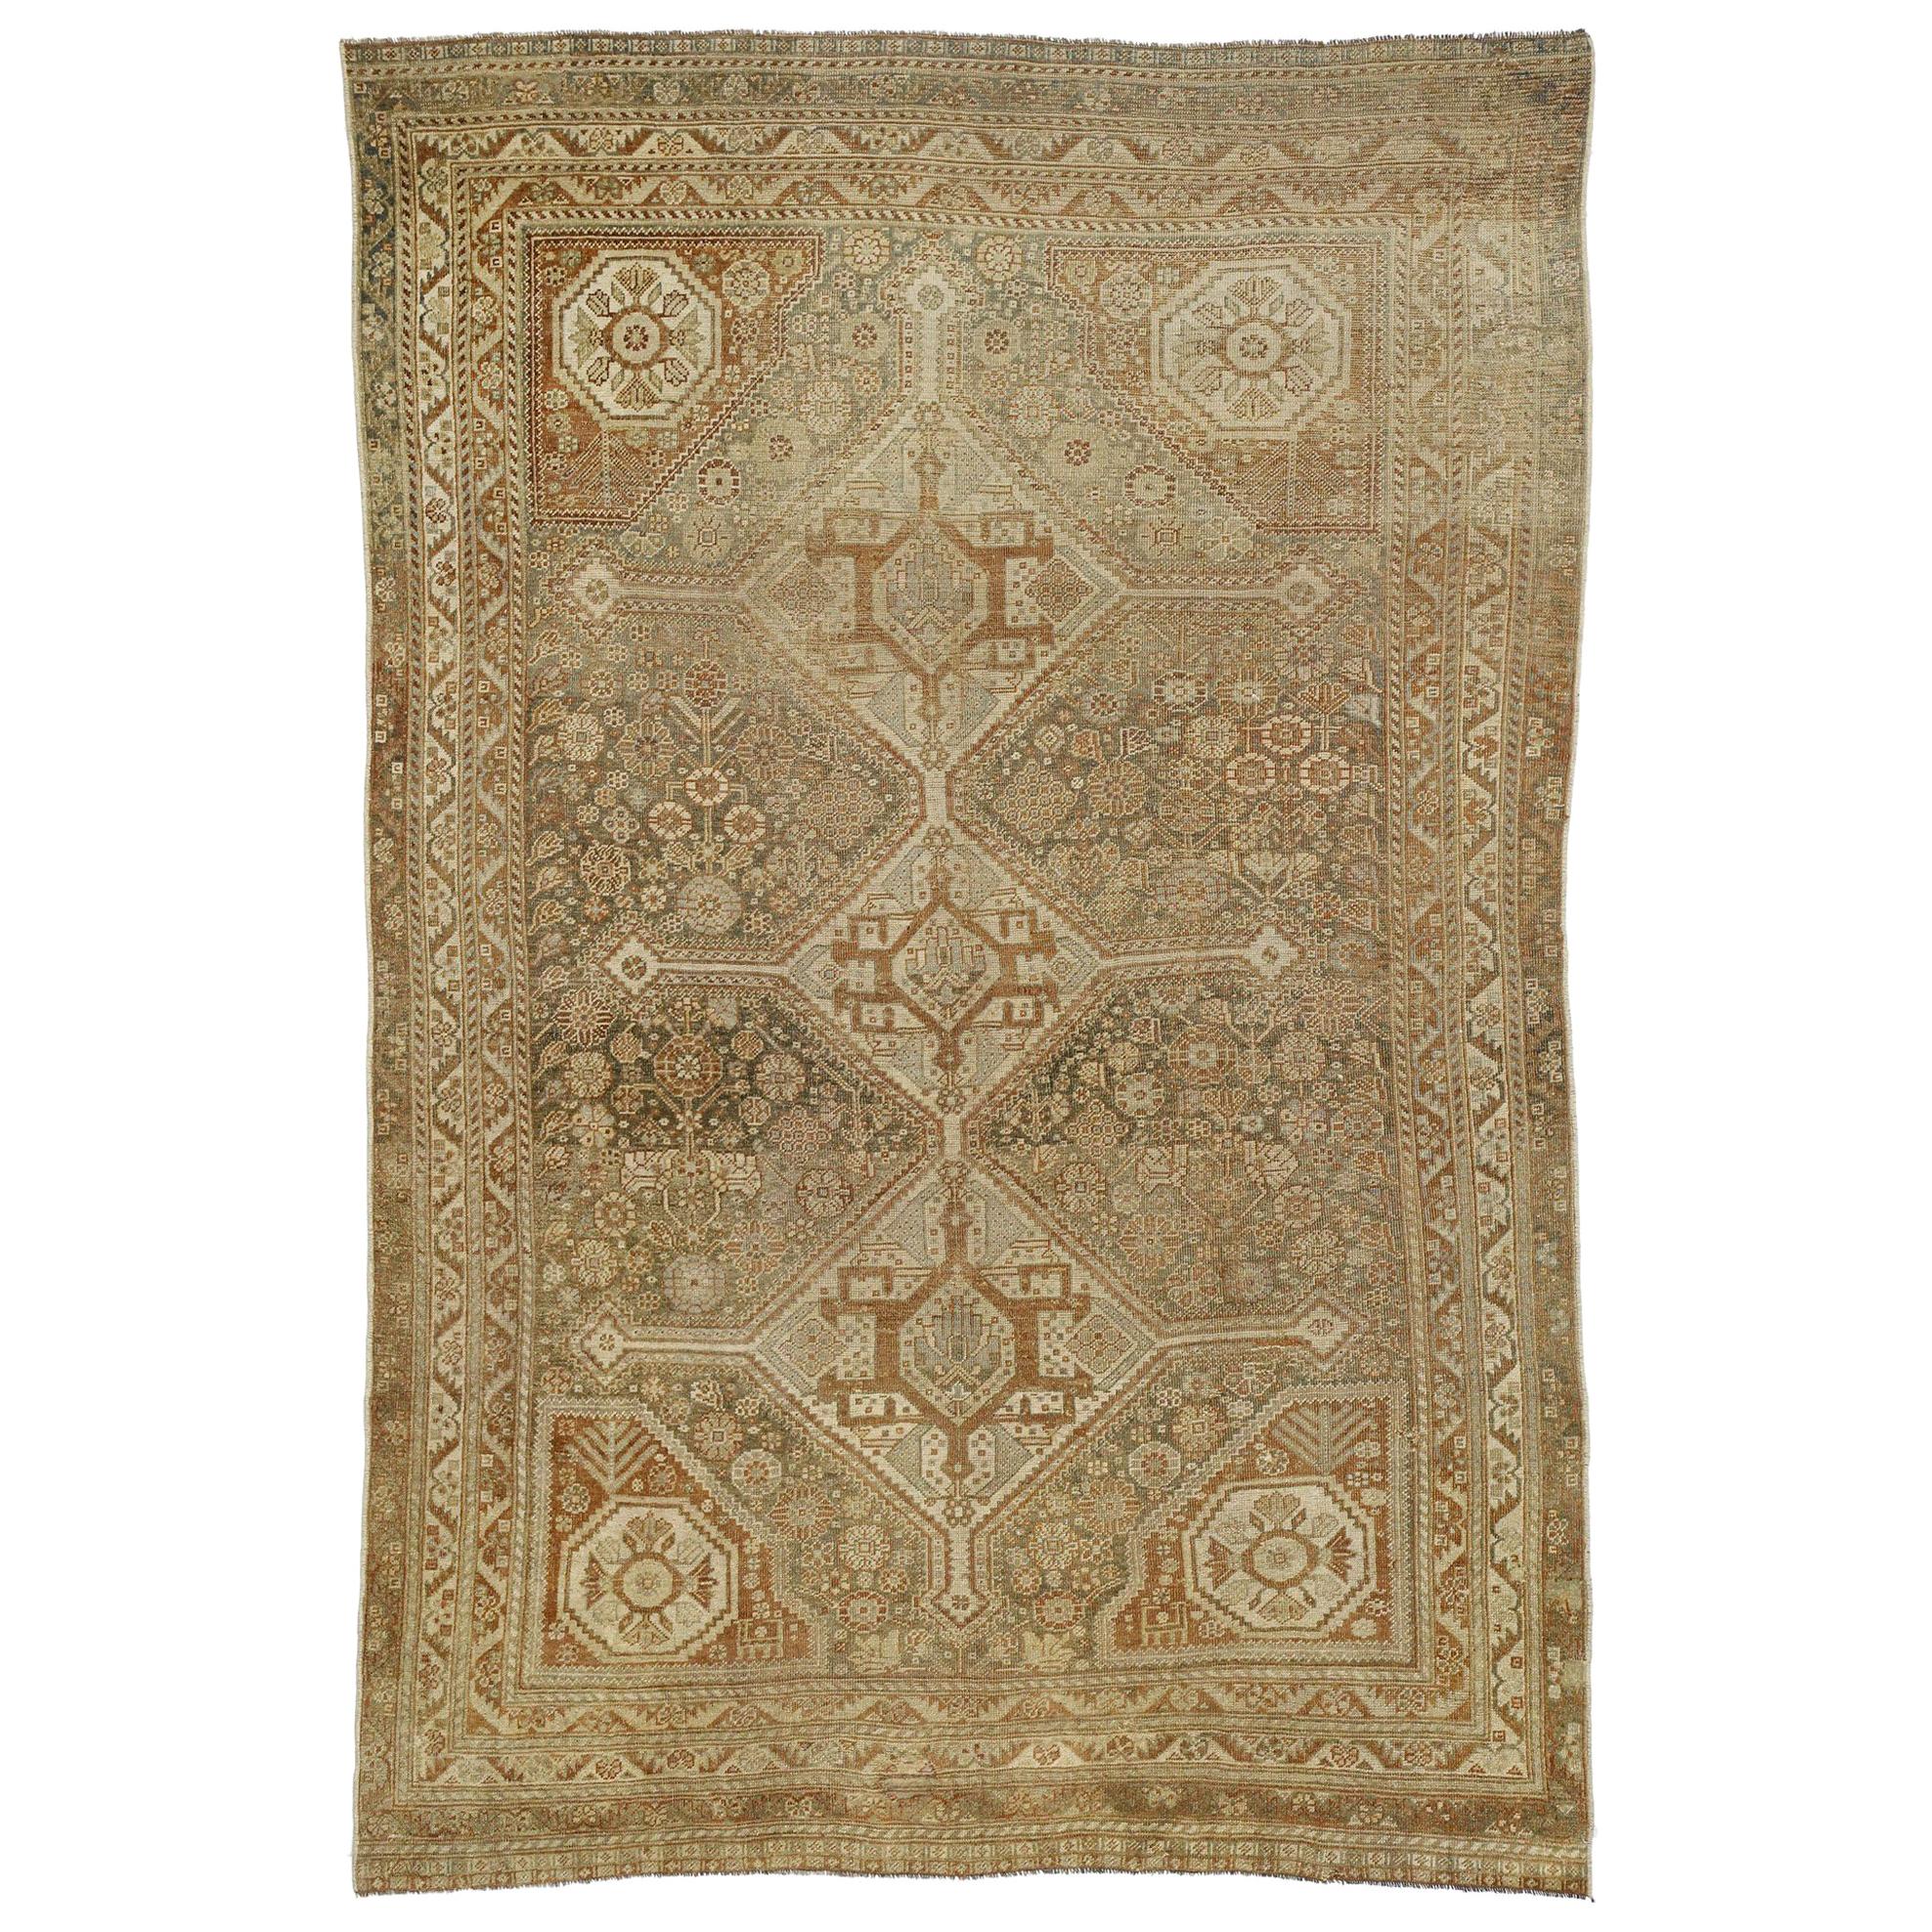 Distressed Antique Persian Shiraz Rug with American Craftsman Rustic Style